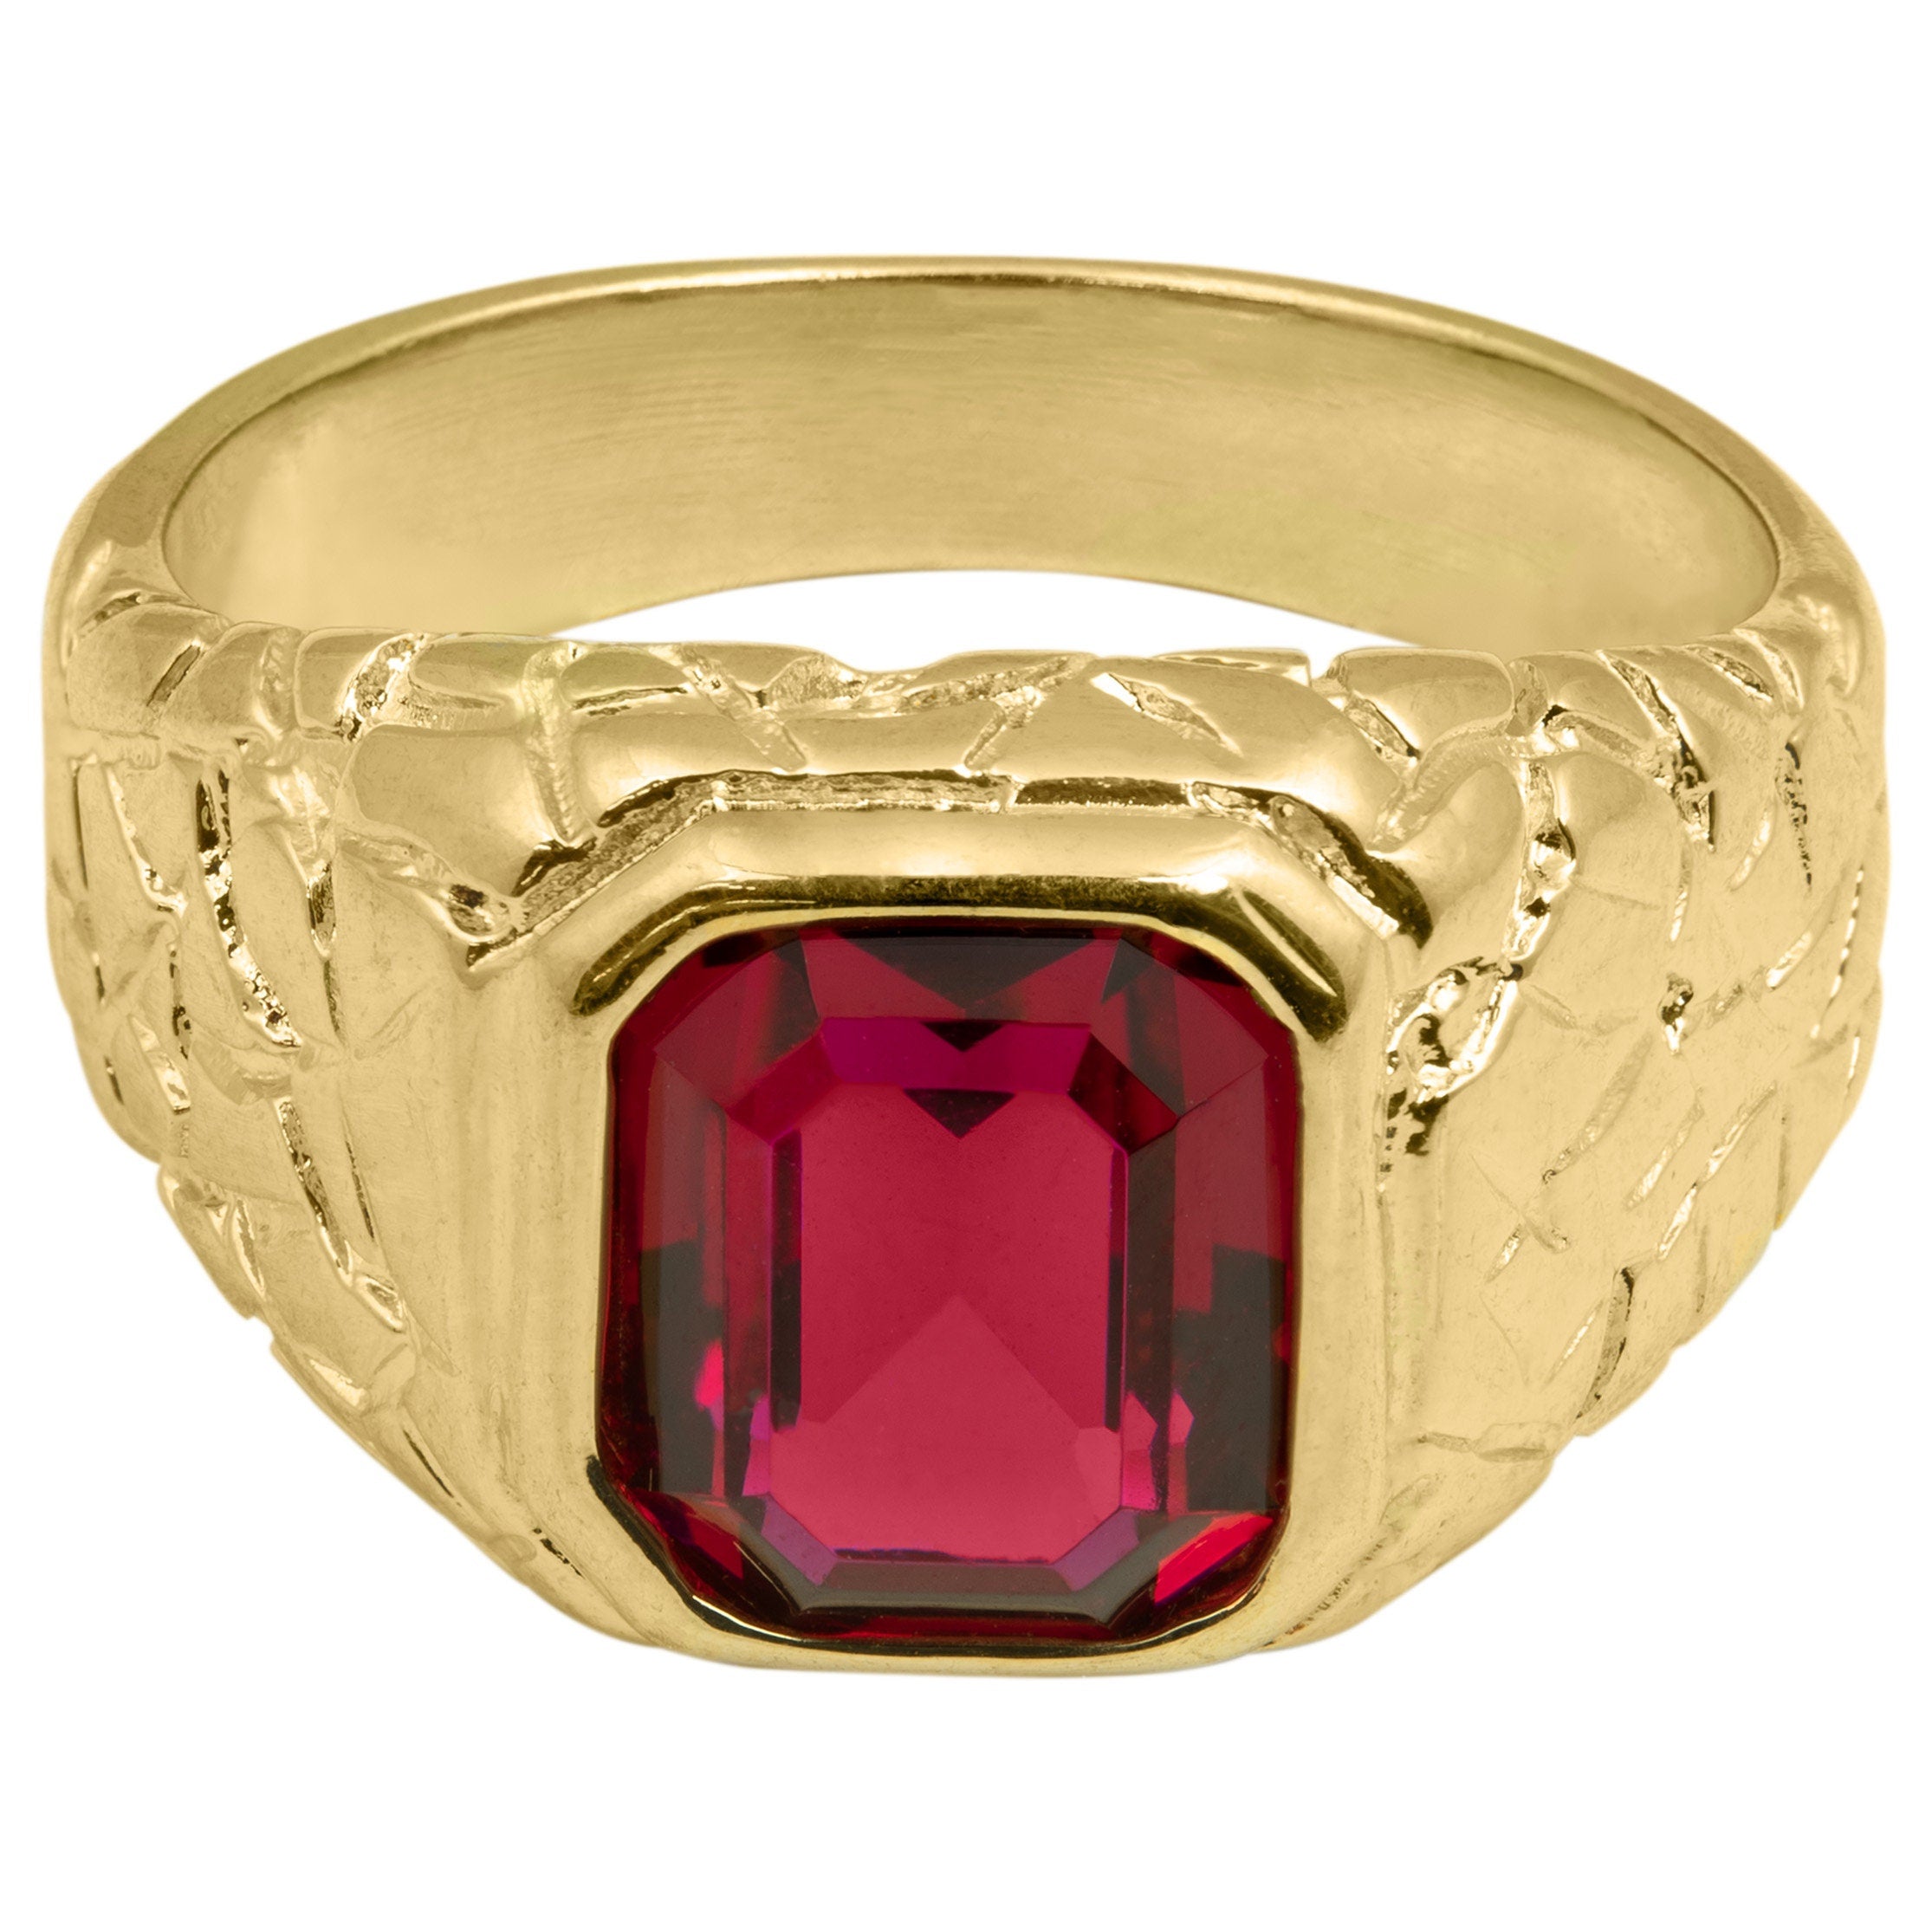 SOLID 925 STERLING SILVER MENS JEWELRY SUBLIME RED RUBY MEN'S RING –  Stamboul Jewelry